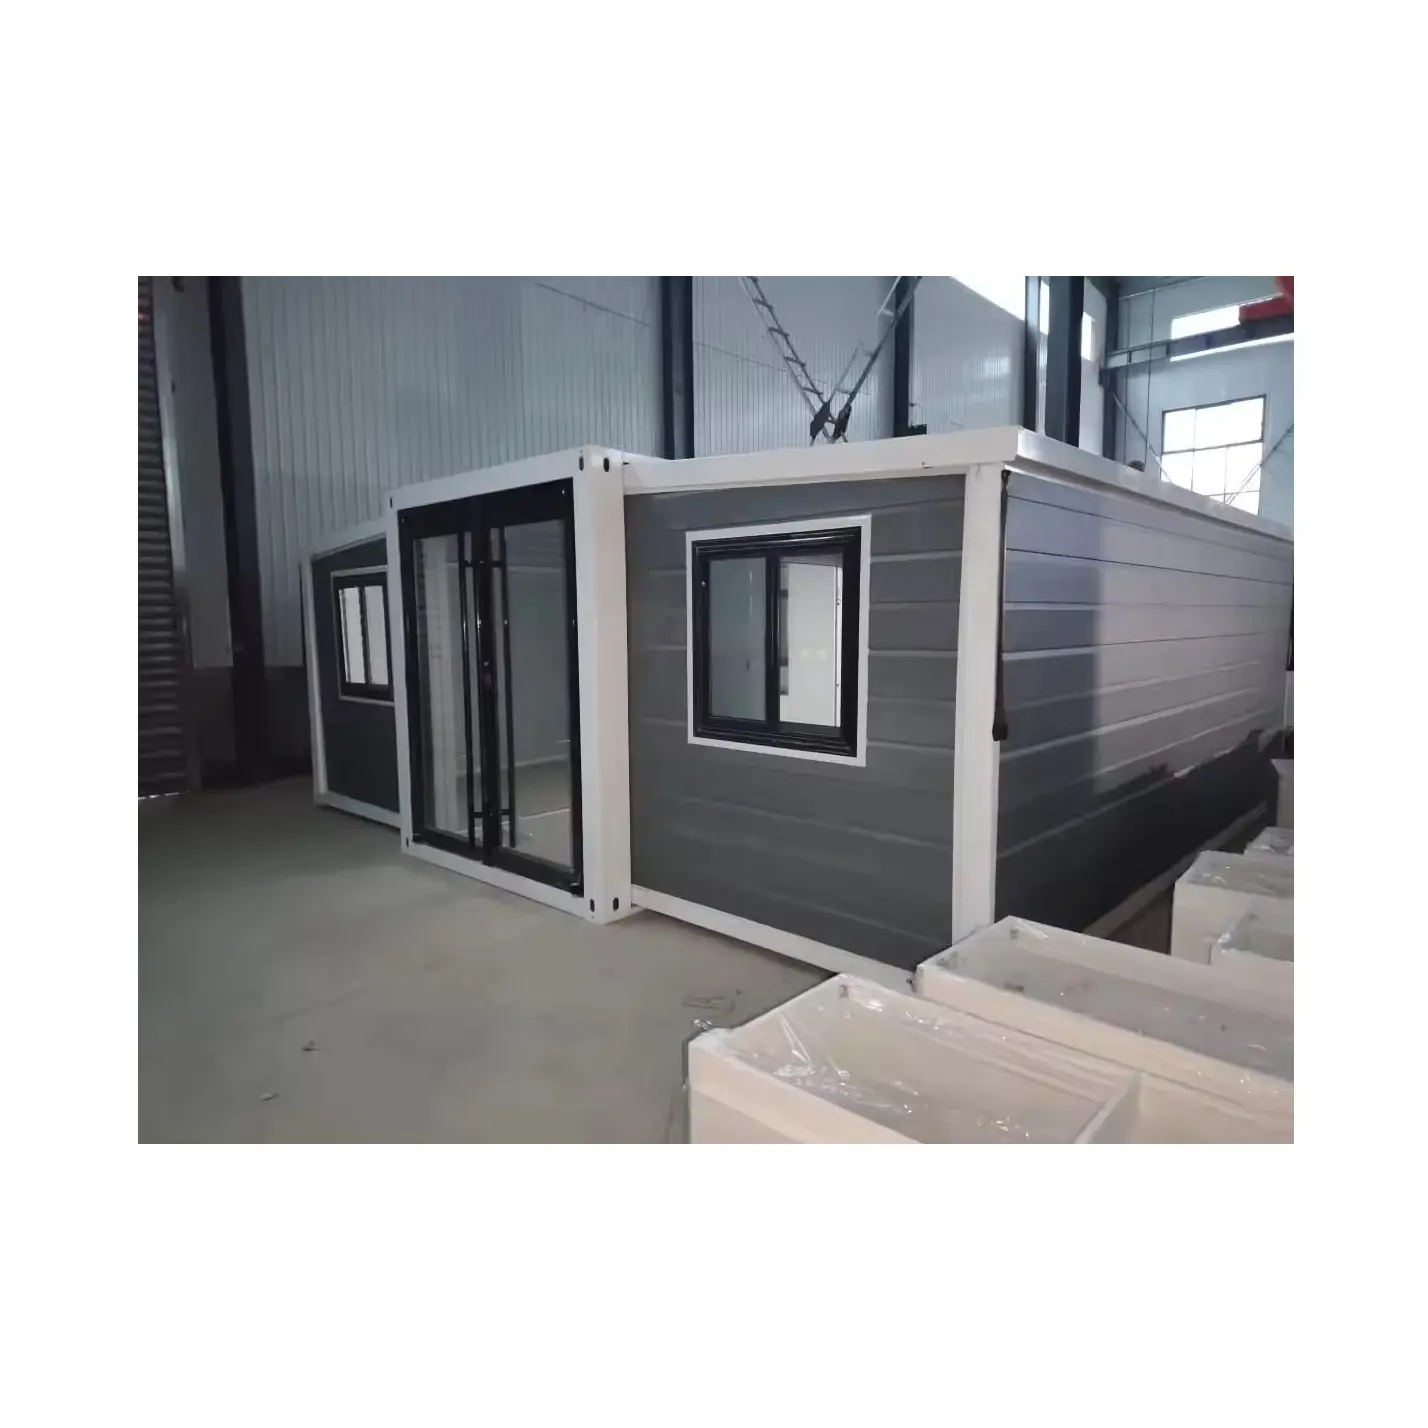 High on Demand Prefabricated Buildings Aluminum Steel Container House for Outdoor Decor Available for Sale